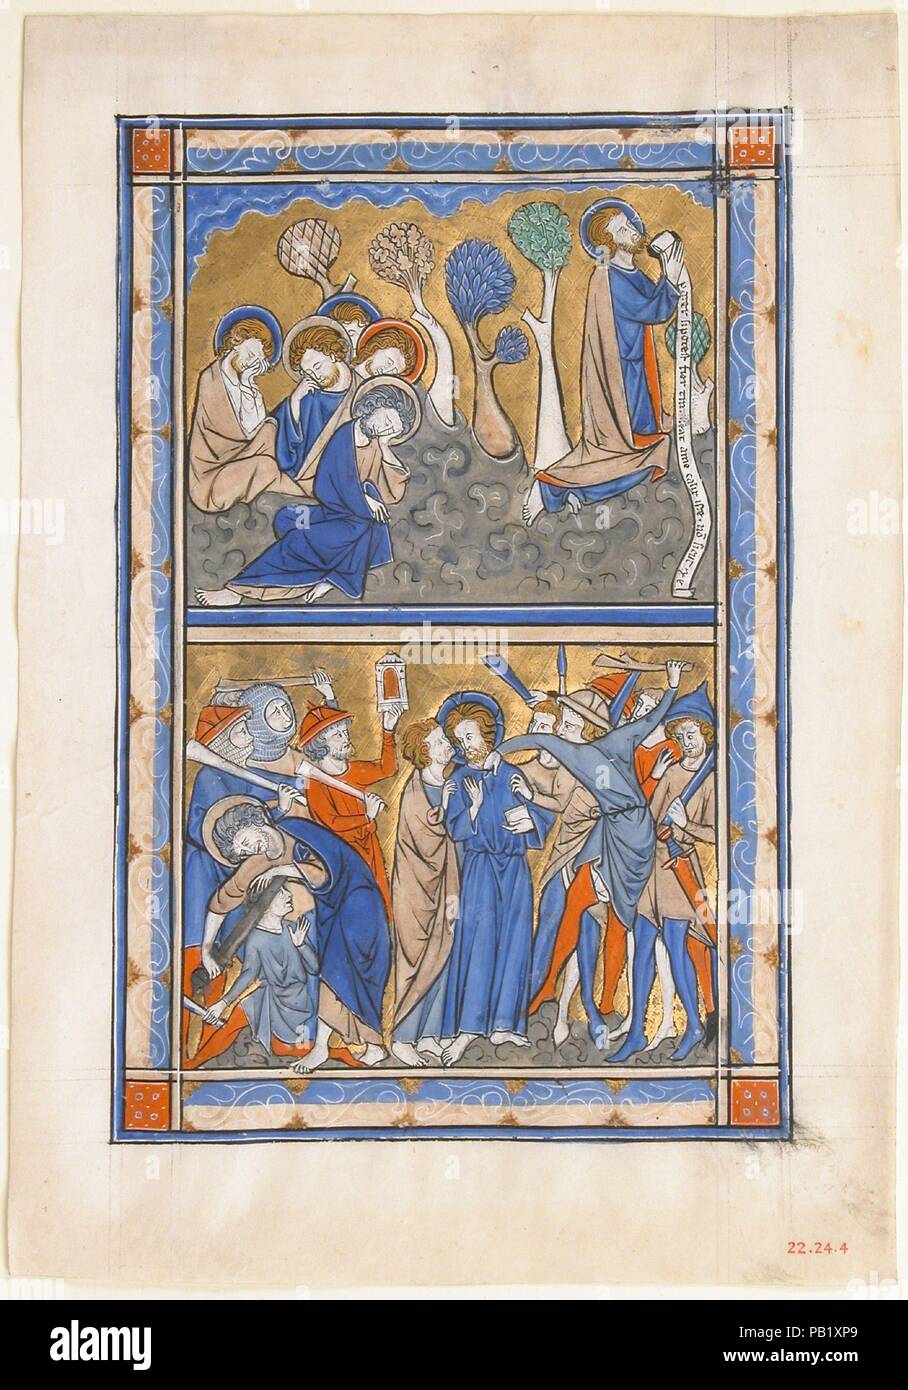 Manuscript Leaf with the Agony in the Garden and Betrayal of Christ, from a Royal Psalter. Culture: British. Dimensions: Overall: 9 1/4 x 6 1/2 in. (23.5 x 16.5 cm)  Illumination: 7 1/2 x 5 in. (19.1 x 12.7 cm)  Mat size: 14 x 11 in. (35.5 x 27.9 cm). Date: ca. 1270.  This manuscript leaf was once part of a Book of Psalms, a compendium of the 150 celebrated biblical poems of praise. This Psalter was made for an English monarch, probably Queen Eleanor of Provence (ca. 1223-1291), the wife of King Henry III. The queen likely bequeathed it to her niece, Eleanor of Brittany, who later became abbes Stock Photo